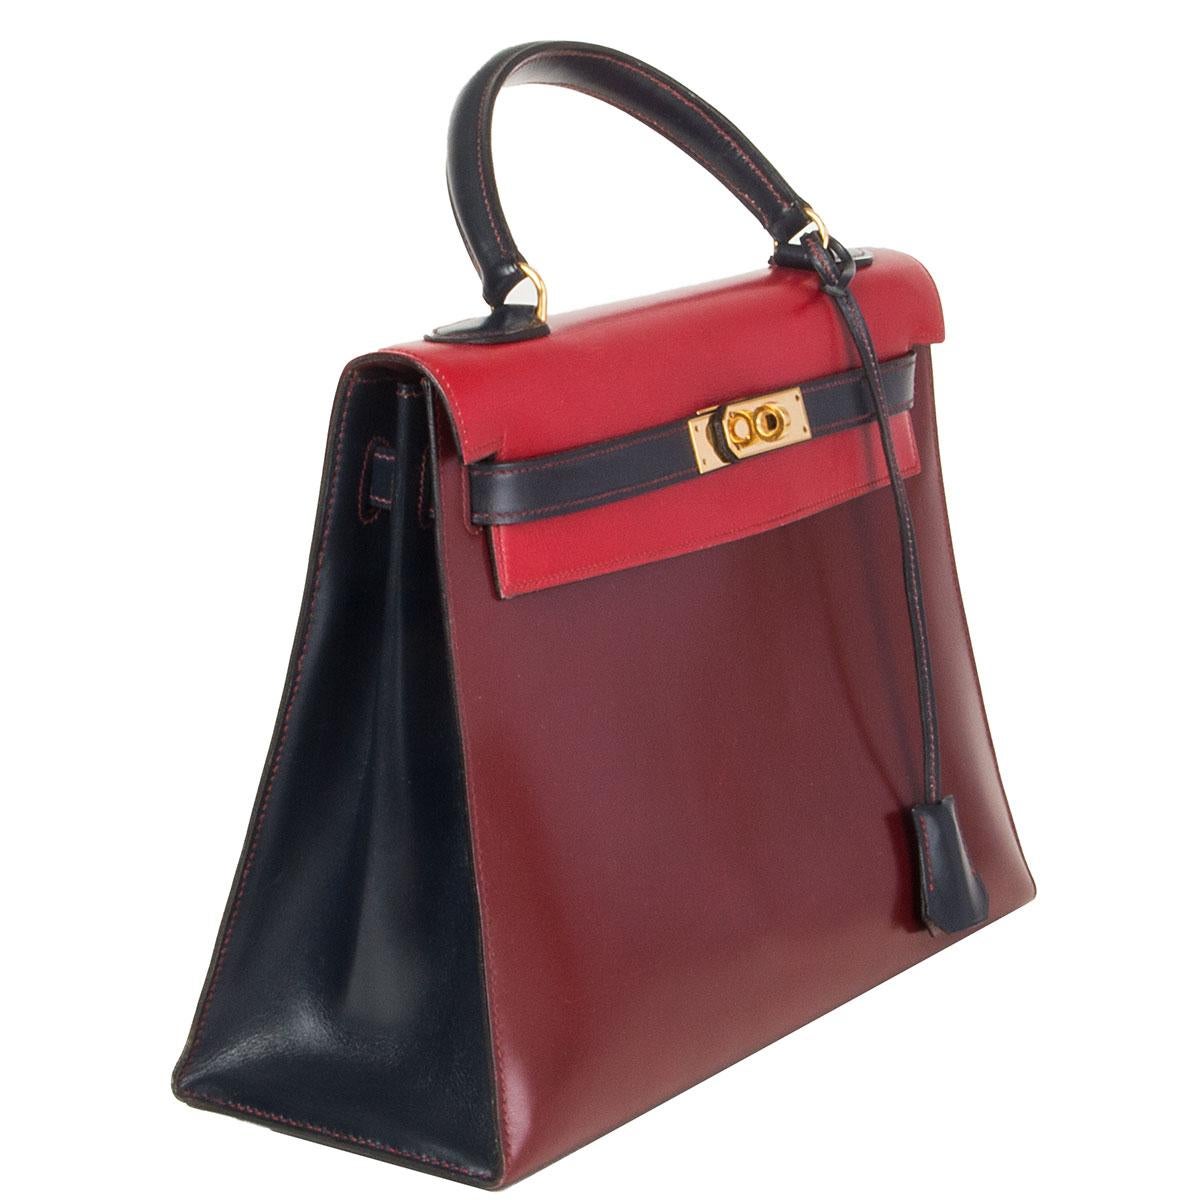 100% authentic Hermès 'Kelly I 32 Sellier' bag in Rouge H (burgundy), Rouge Vif (red) and Bleu Marine (navy blue) Veau Box leather with gold-plated hardware. Vintage 1983. Lined in Rouge H Chevre (goat skin) with two open pockets against the front